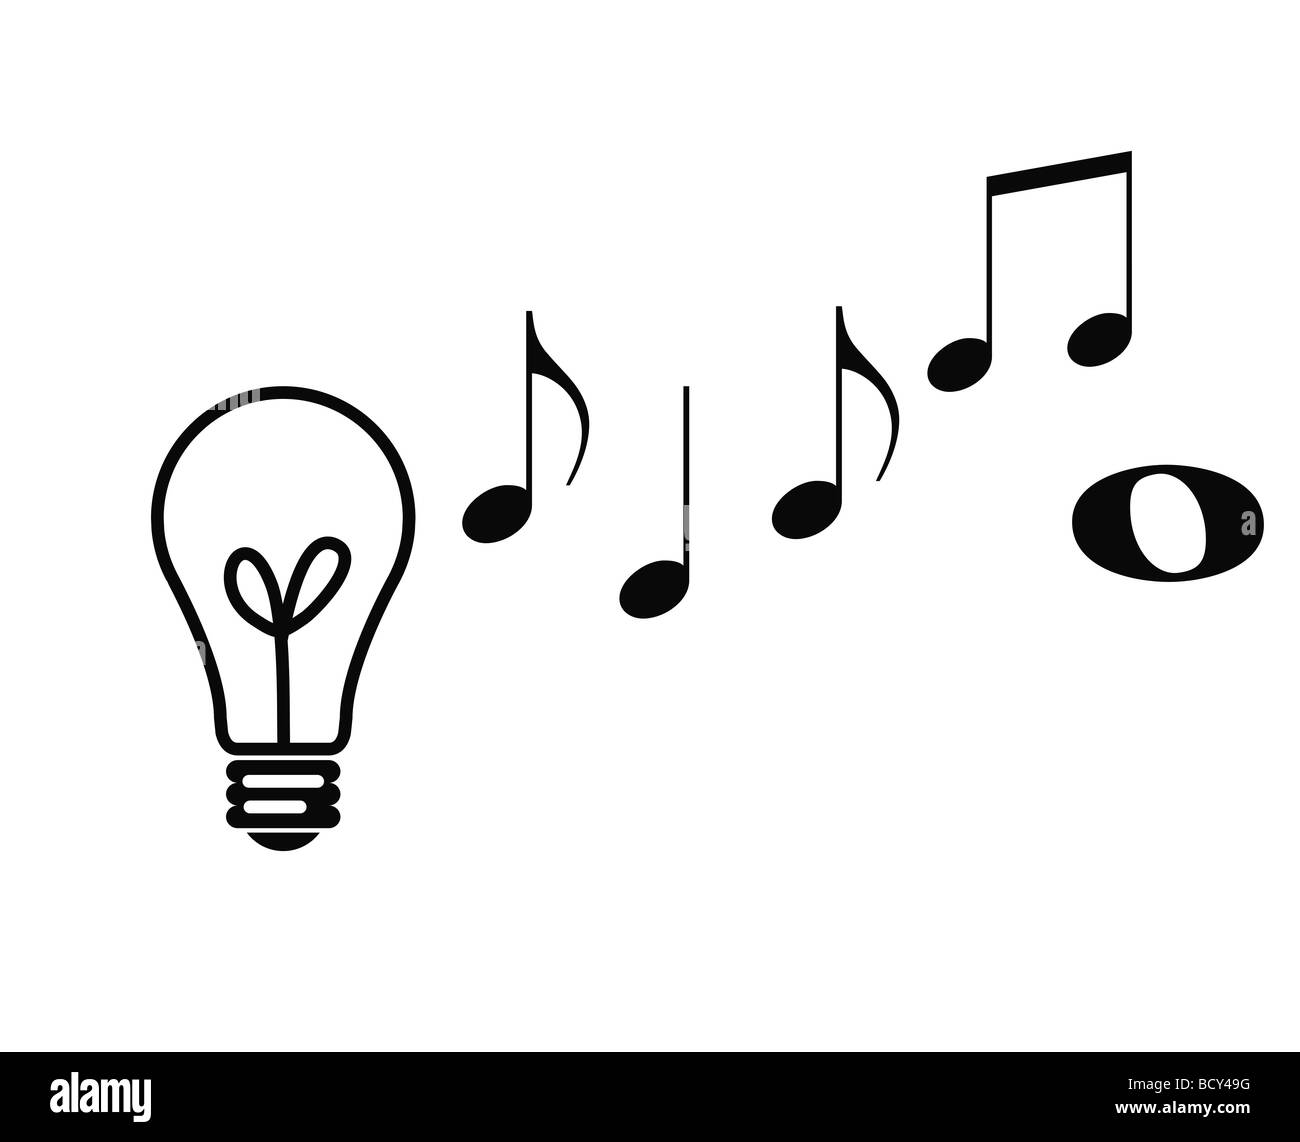 Conceptual view of musical notes rising from lightbulb depicting musical composition ideas Stock Photo